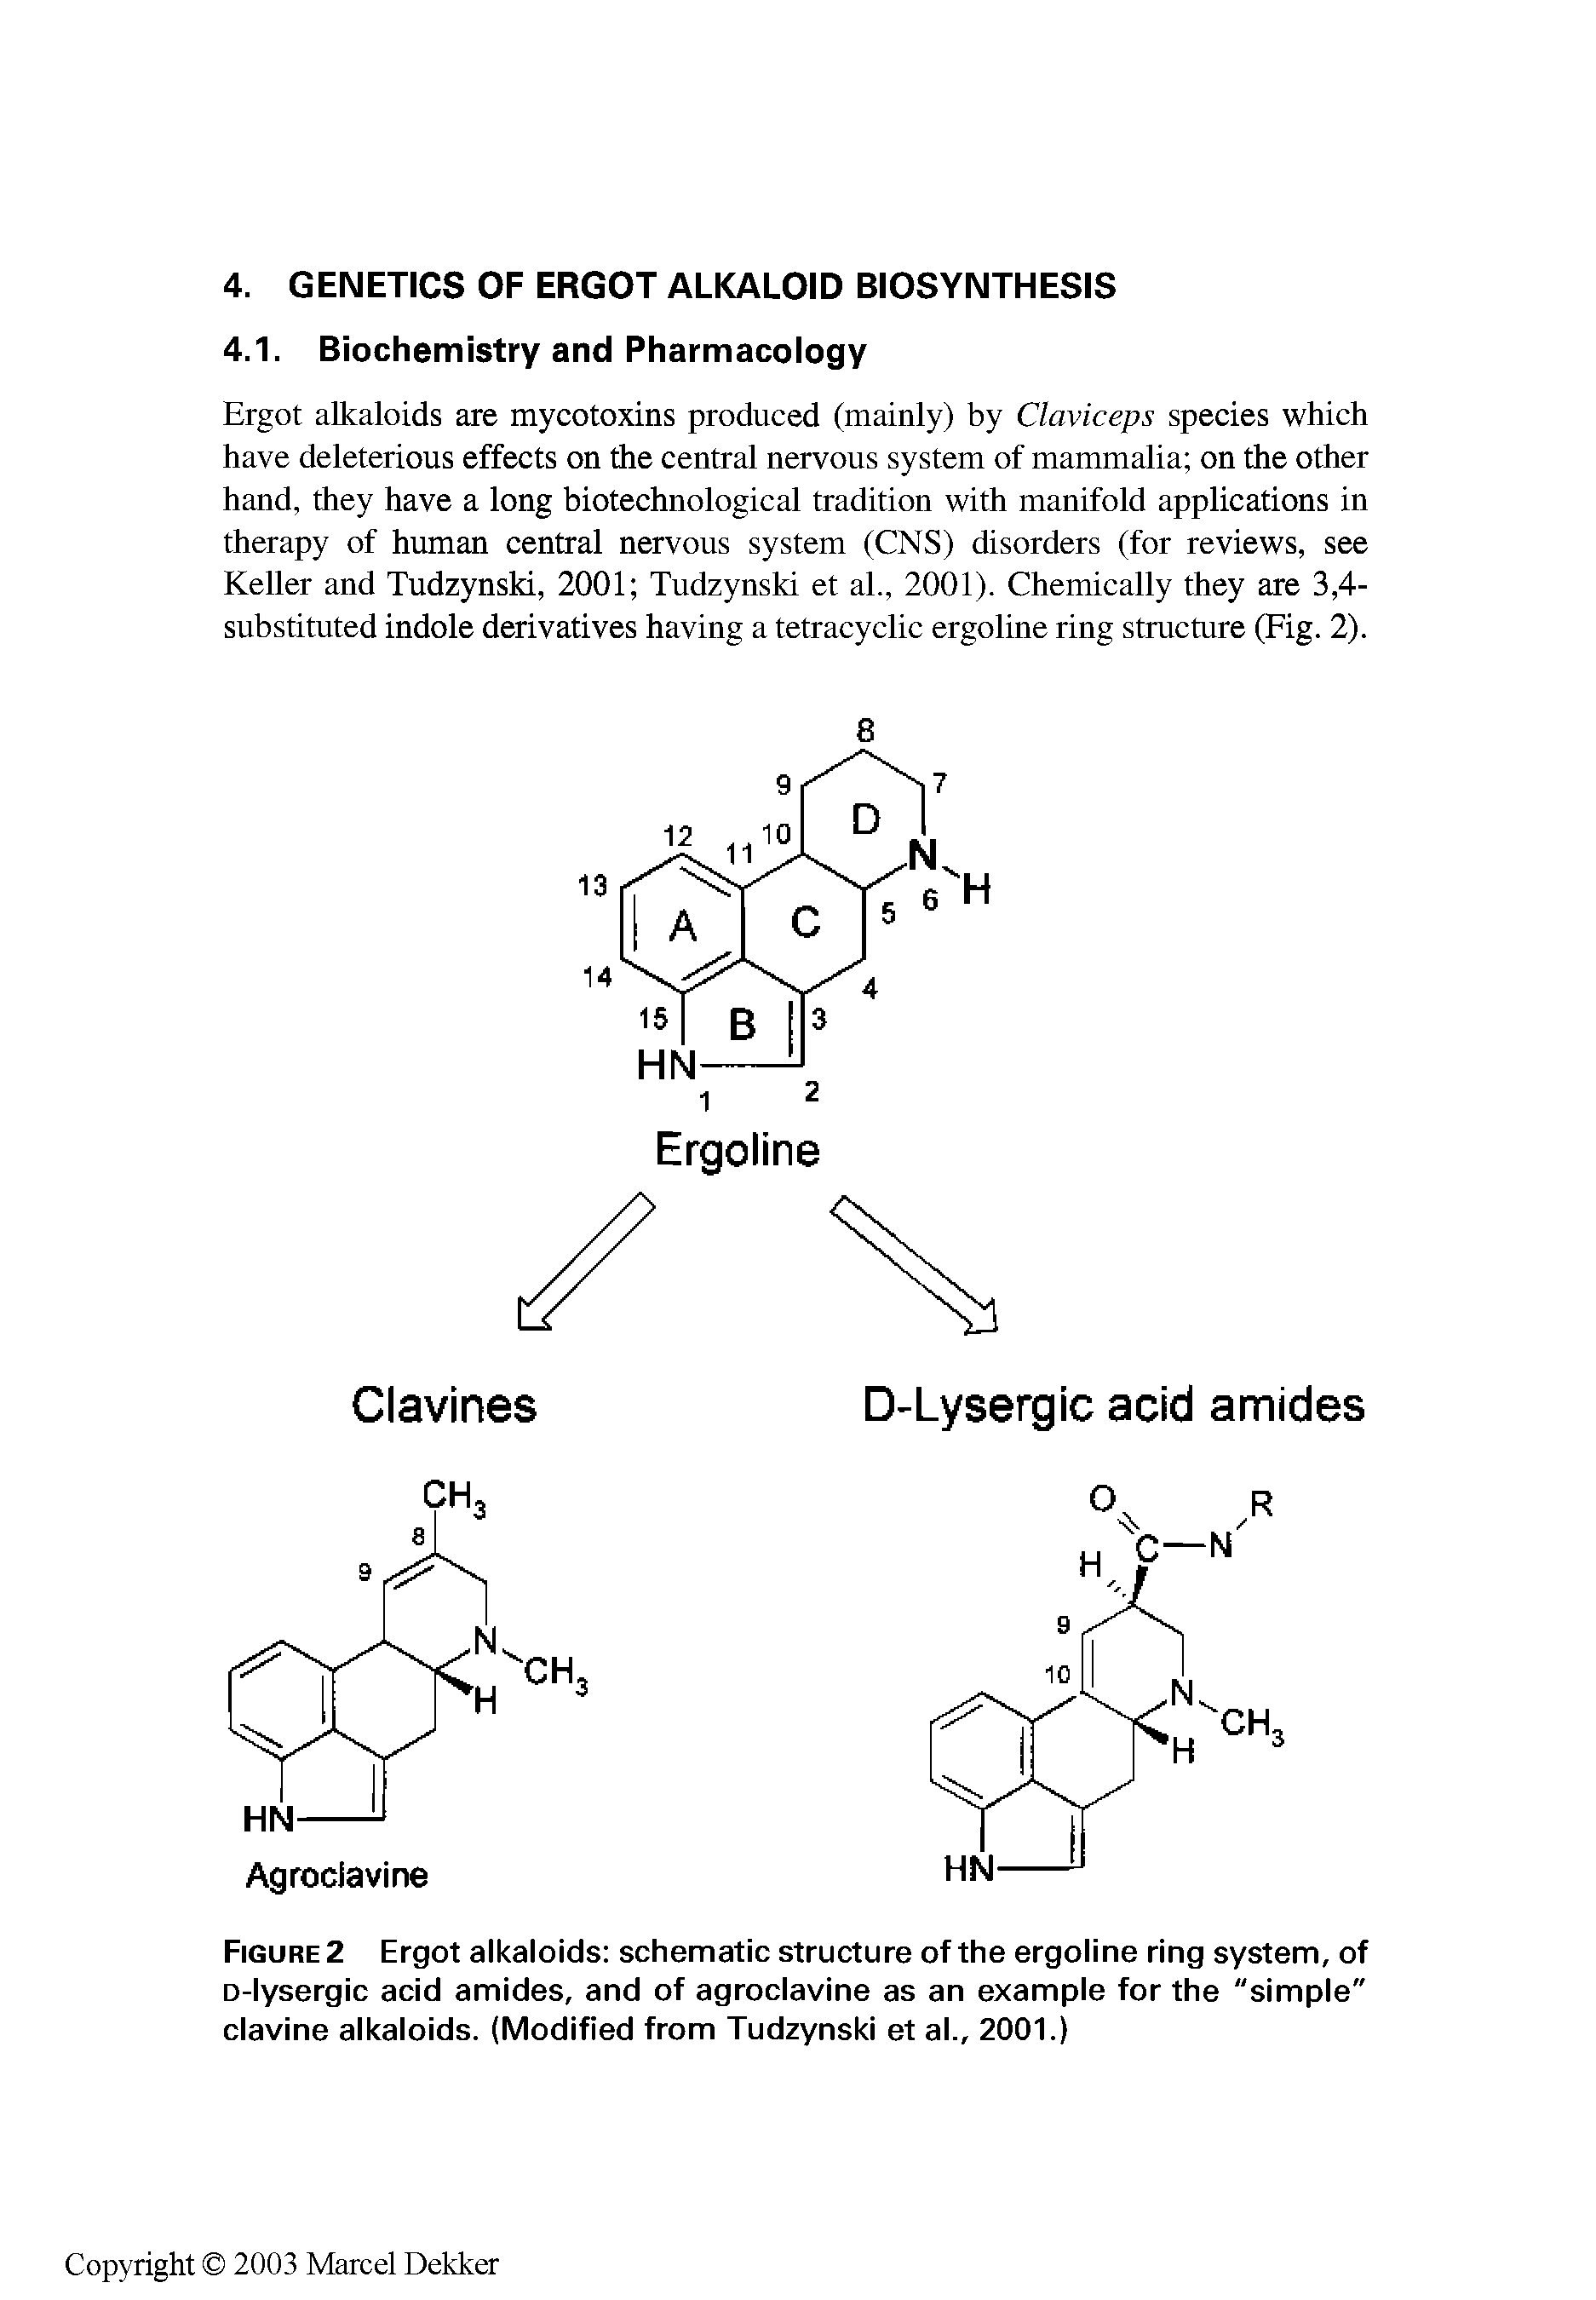 Figure 2 Ergot alkaloids schematic structure of the ergoline ring system, of D-lysergic acid amides, and of agroclavine as an example for the "simple" clavine alkaloids. (Modified from Tudzynski et al., 2001.)...